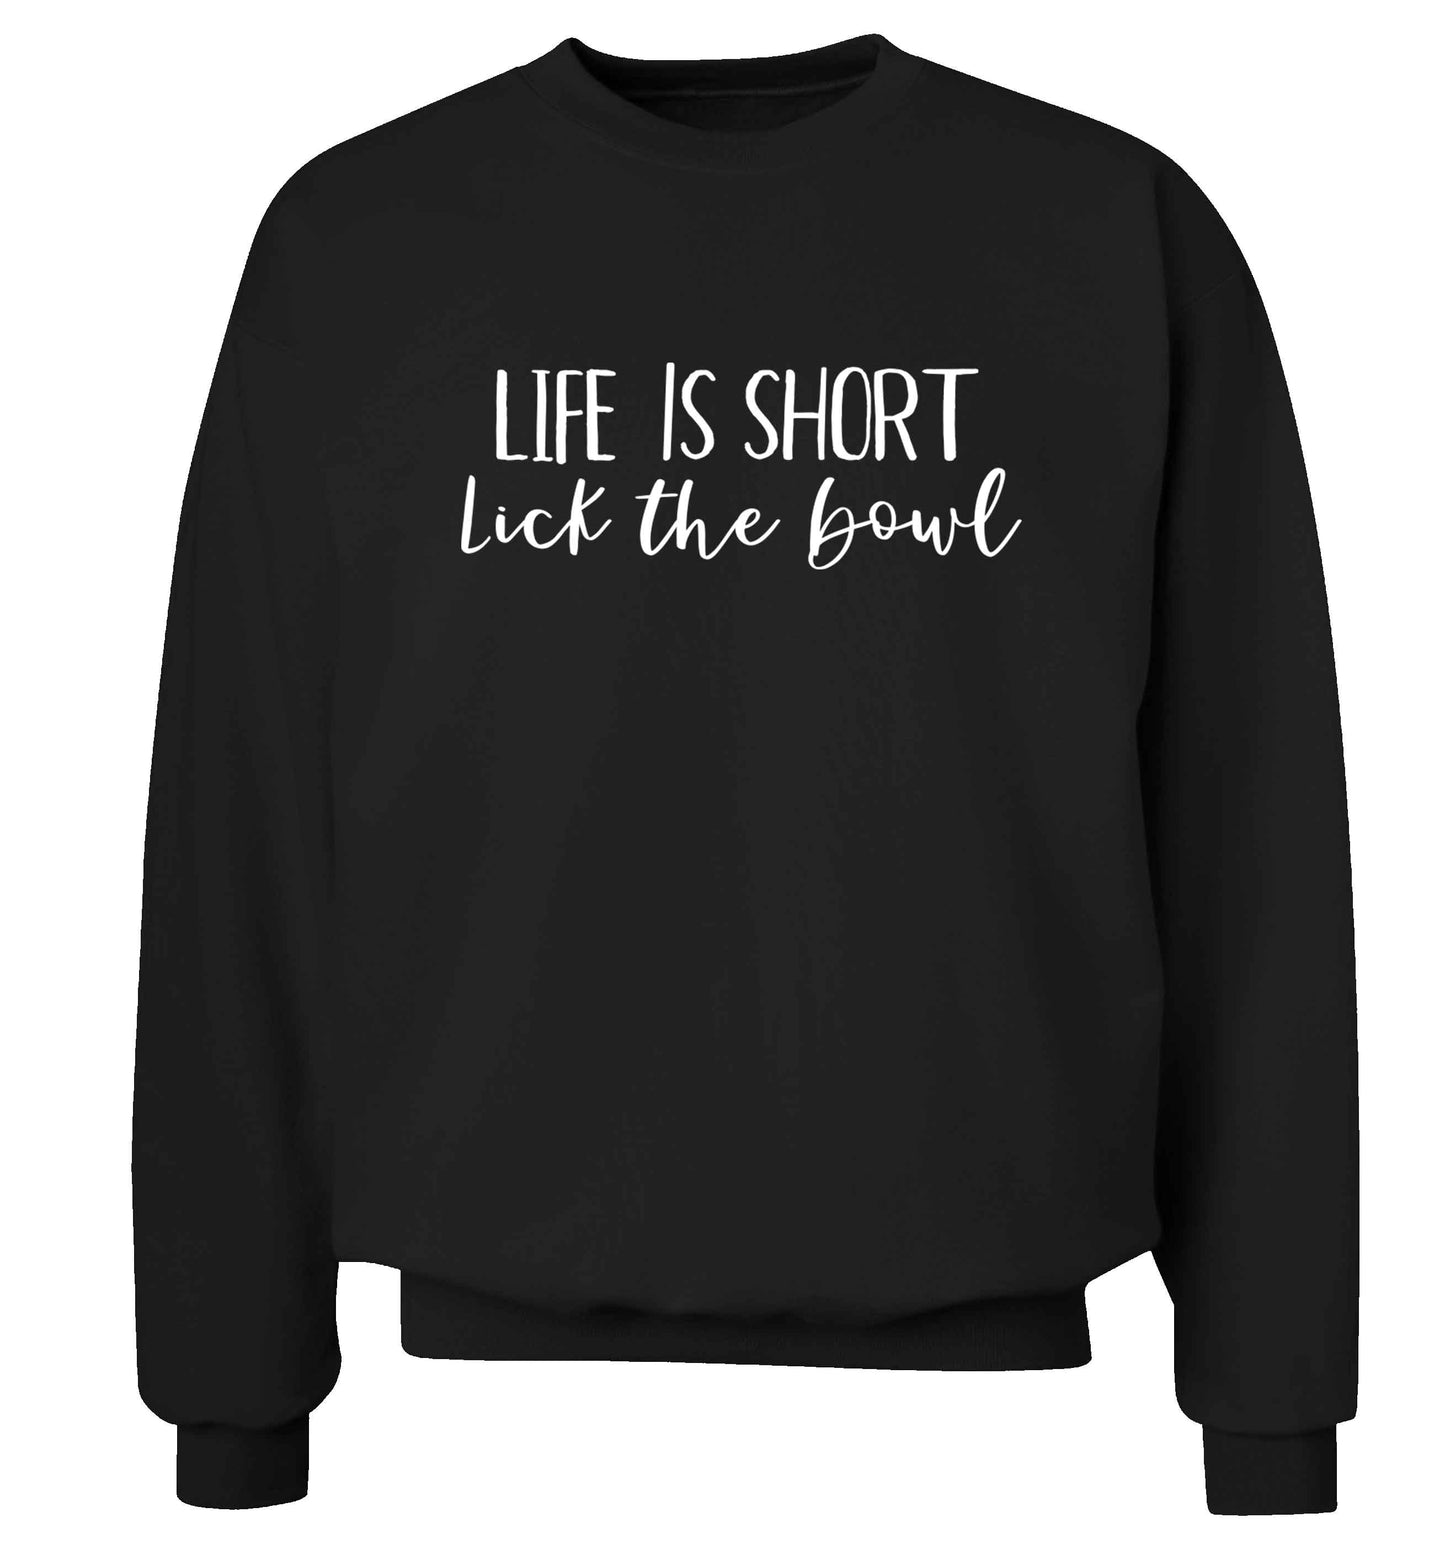 Life is short lick the bowl Adult's unisex black Sweater 2XL